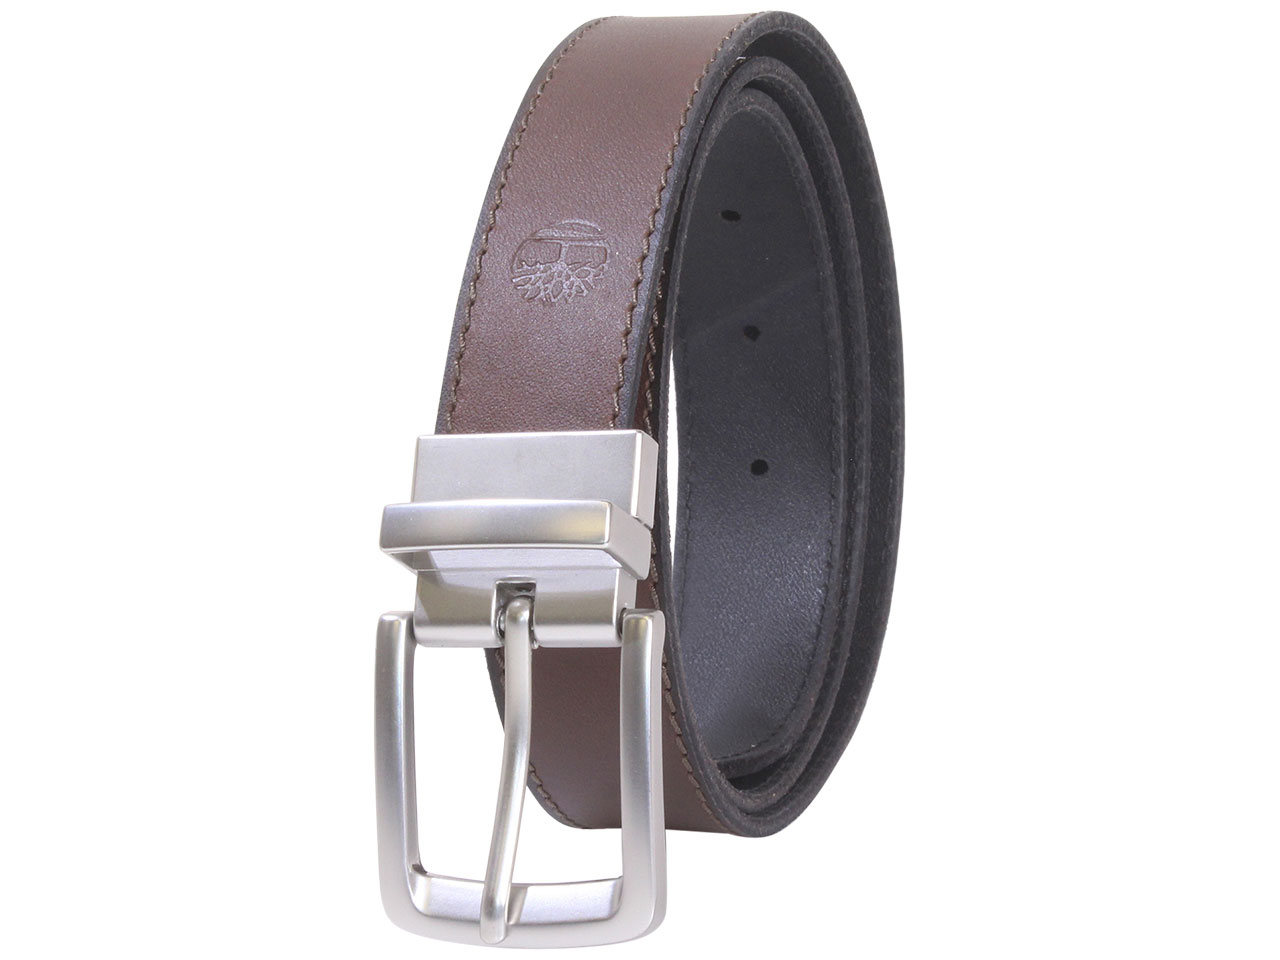 Timberland Men's 38mm Classic Reversible Belt in Brown, Size: 34